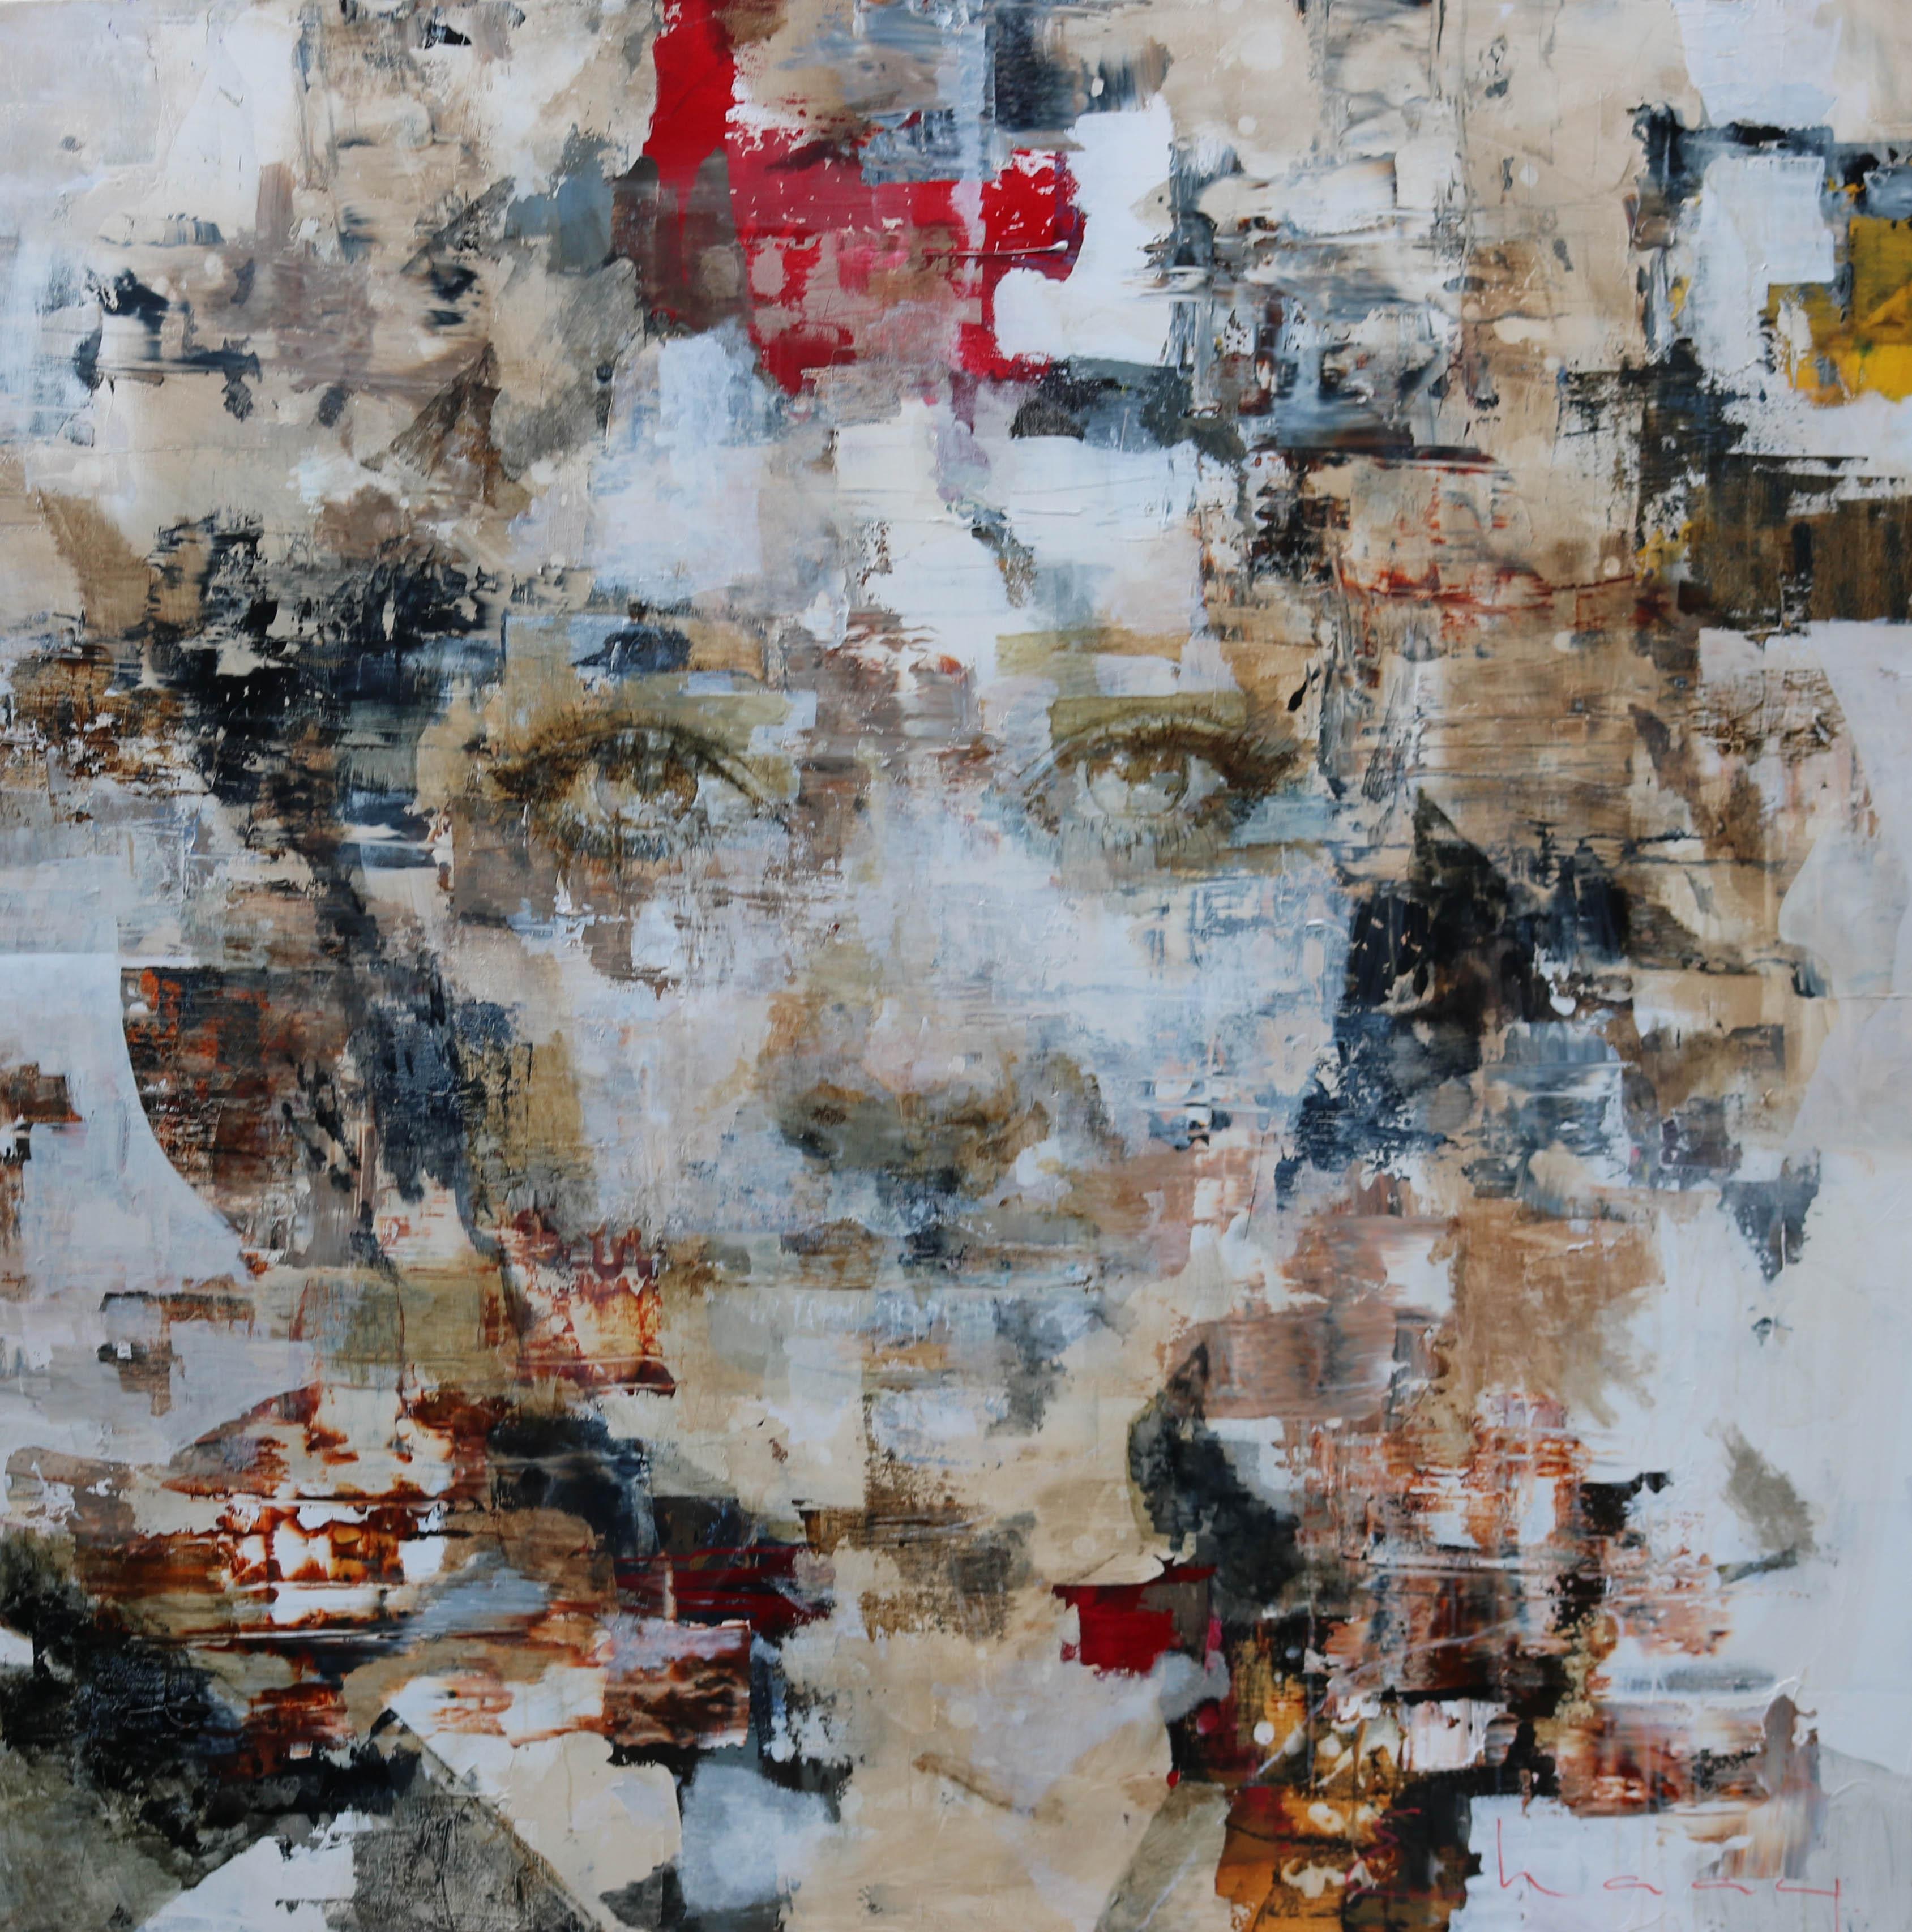 Edo Kaaij Portrait Painting - New Day - 21st Century, Contemporary, Figurative, Abstract Painting, Portrait